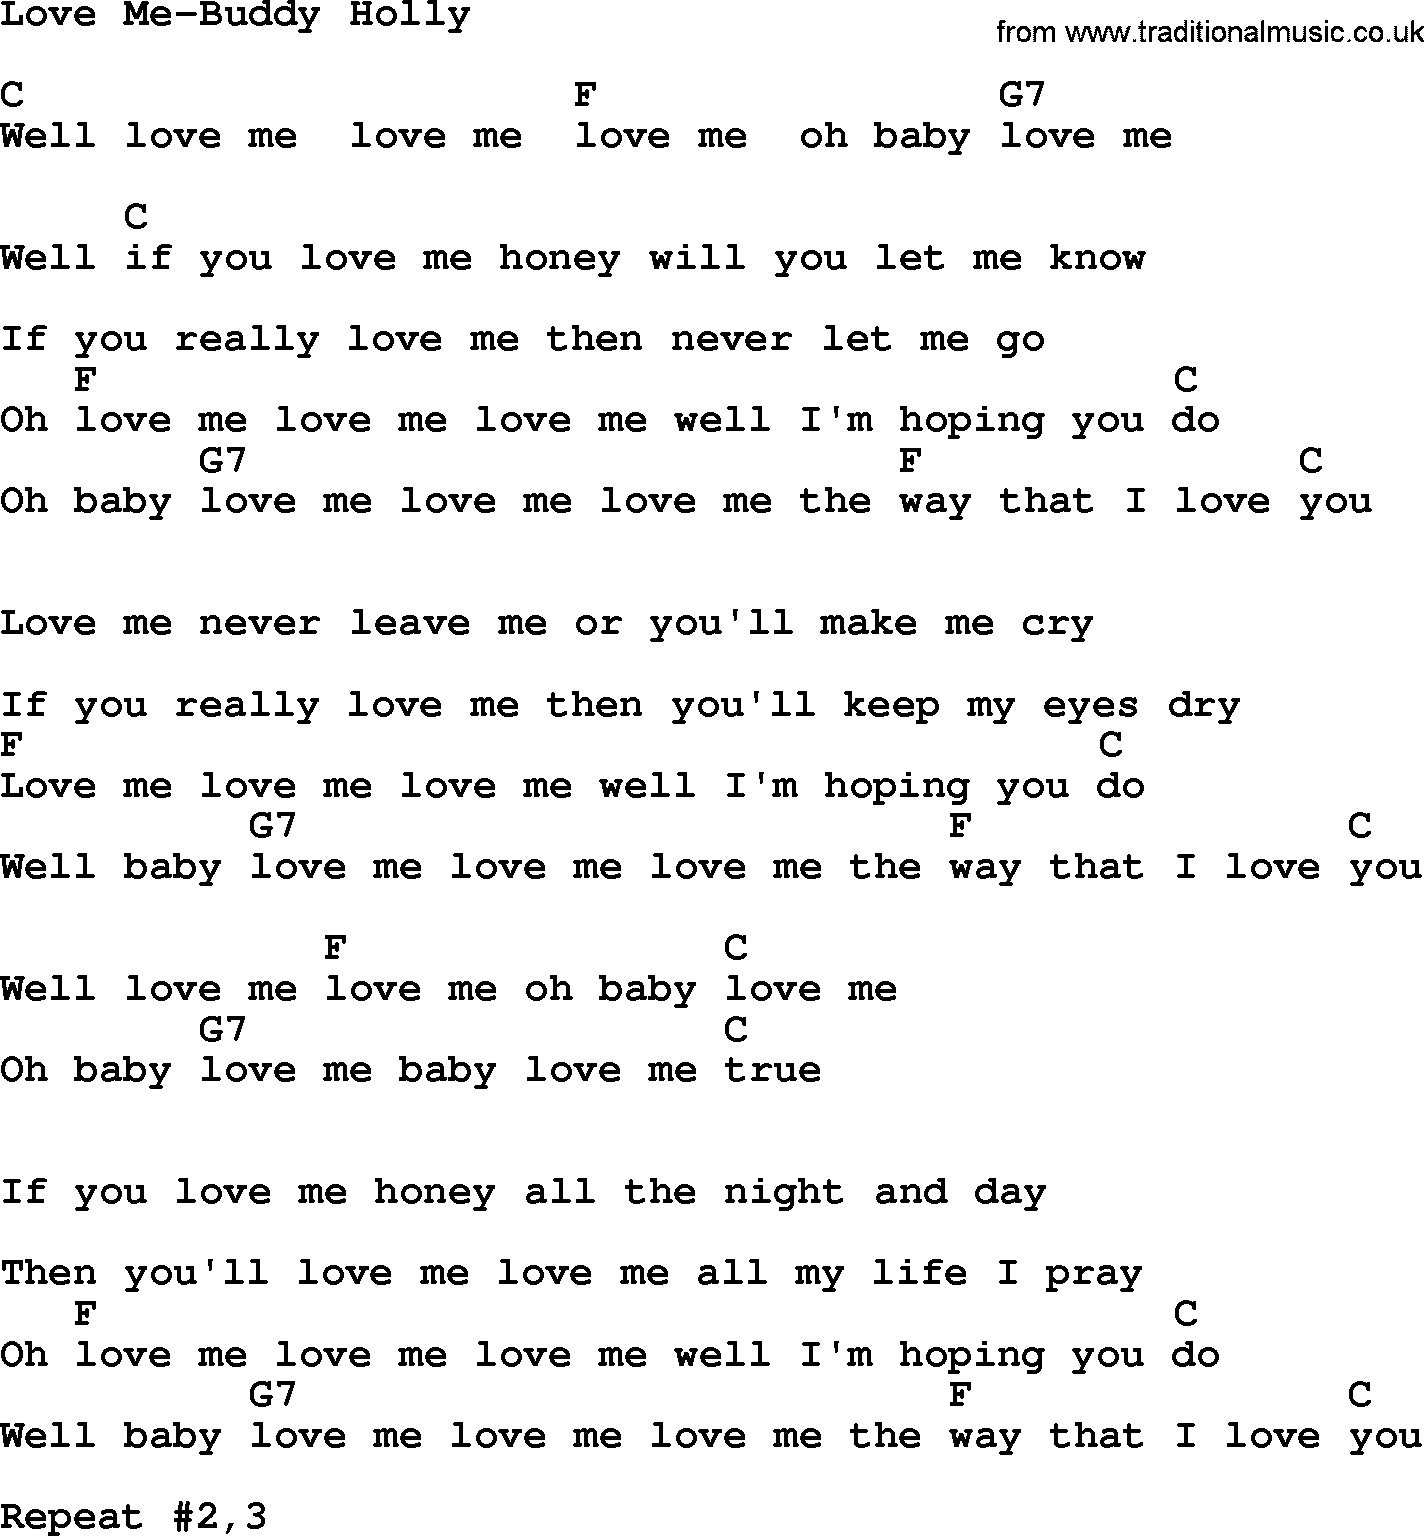 Country music song: Love Me-Buddy Holly lyrics and chords